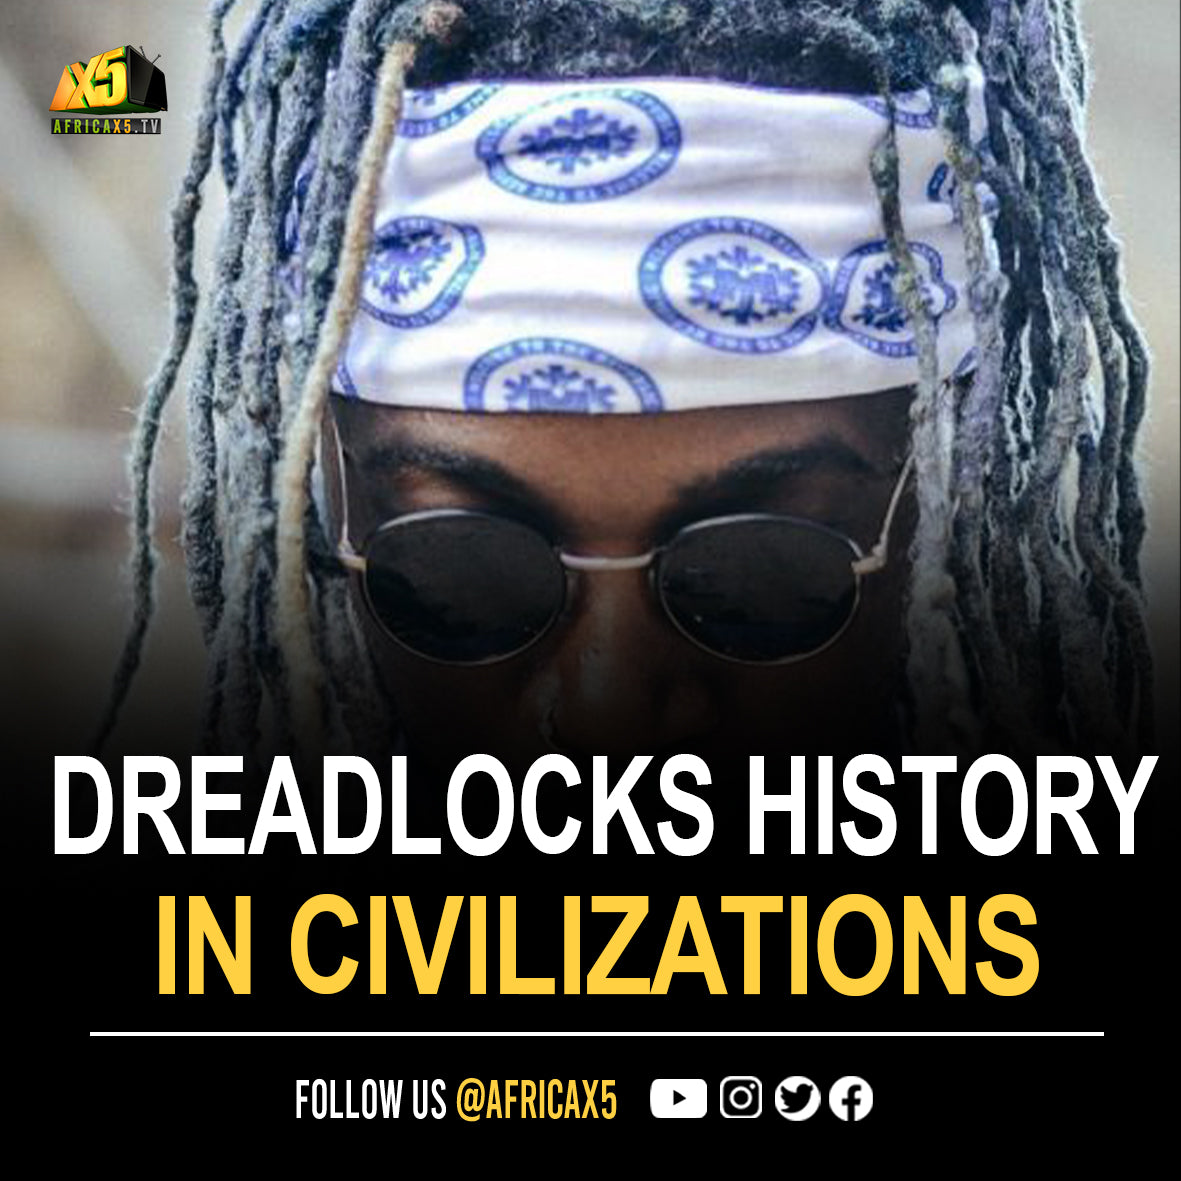 The history of dreadlocks can be traced back to ancient civilizations such as Egypt, India, and Greece.